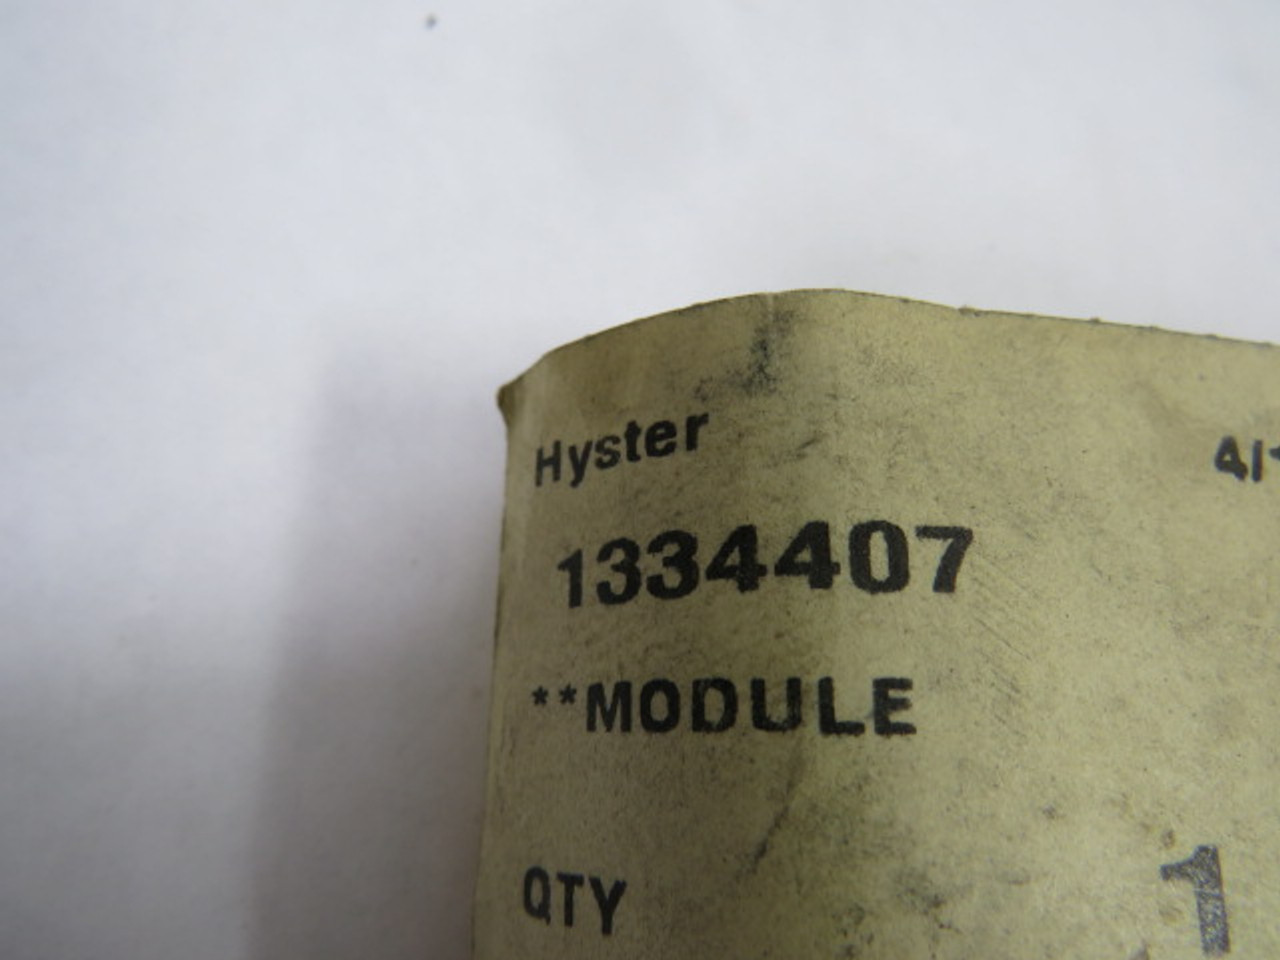 Hyster 1334407 Forklift Ignition Module USED